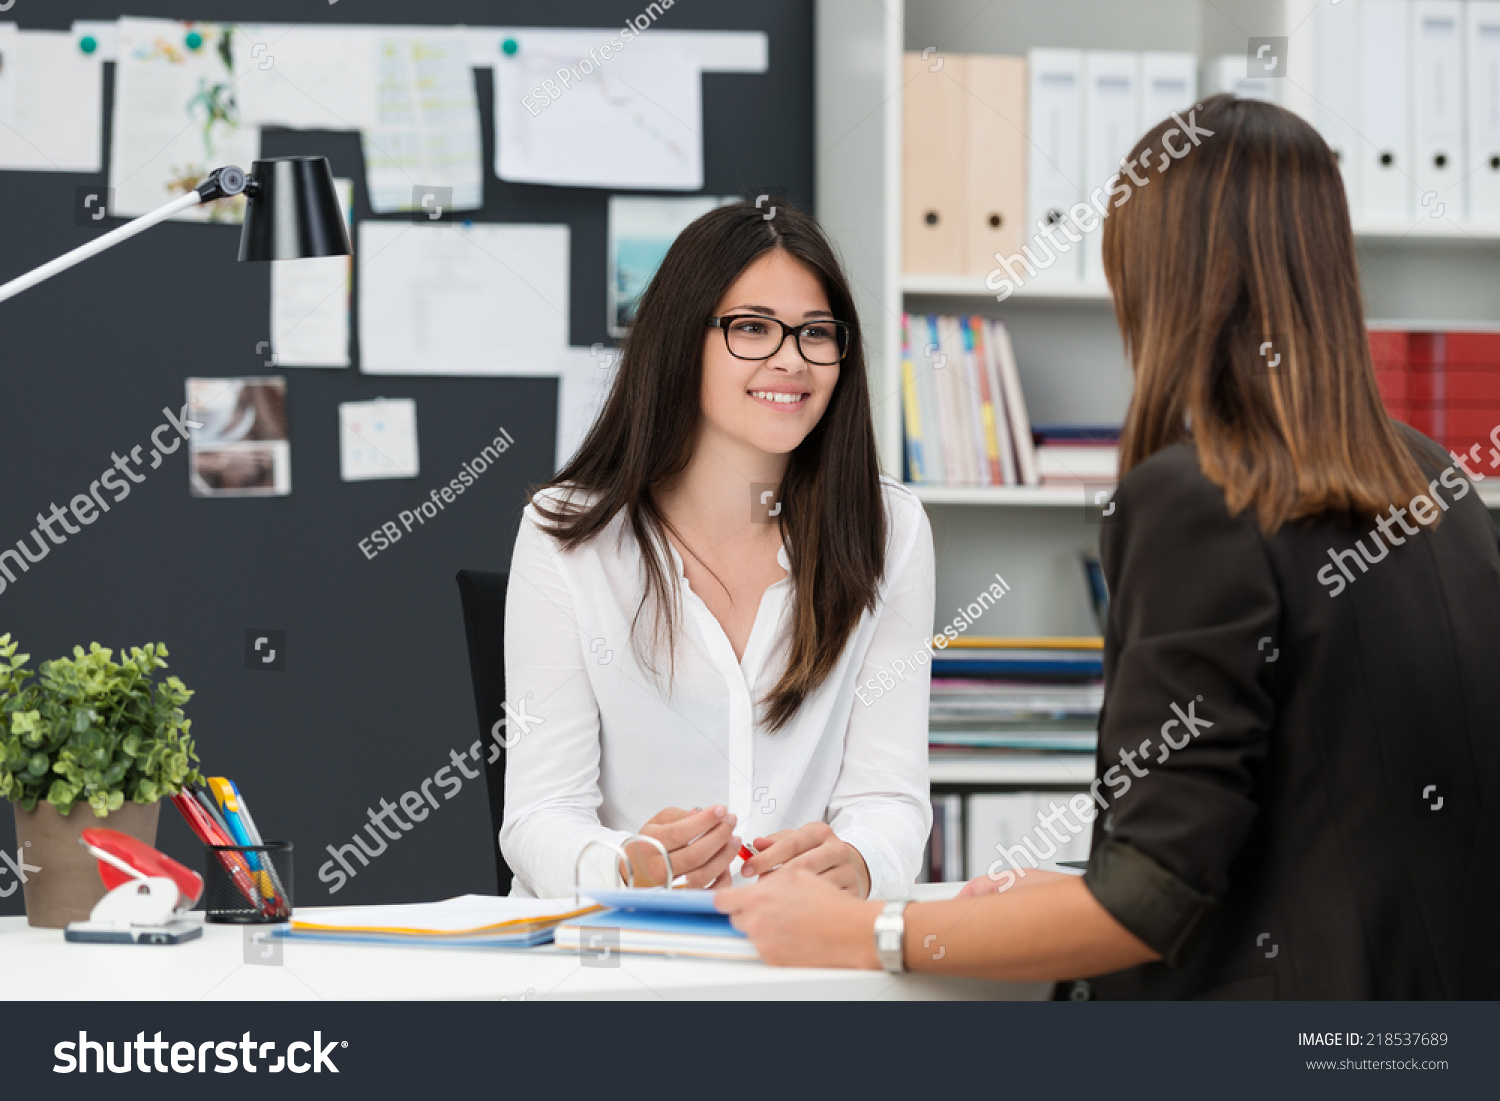 Two young businesswomen having a meeting in the office sitting at a desk having a discussion with focus to a young woman wearing glasses #218537689